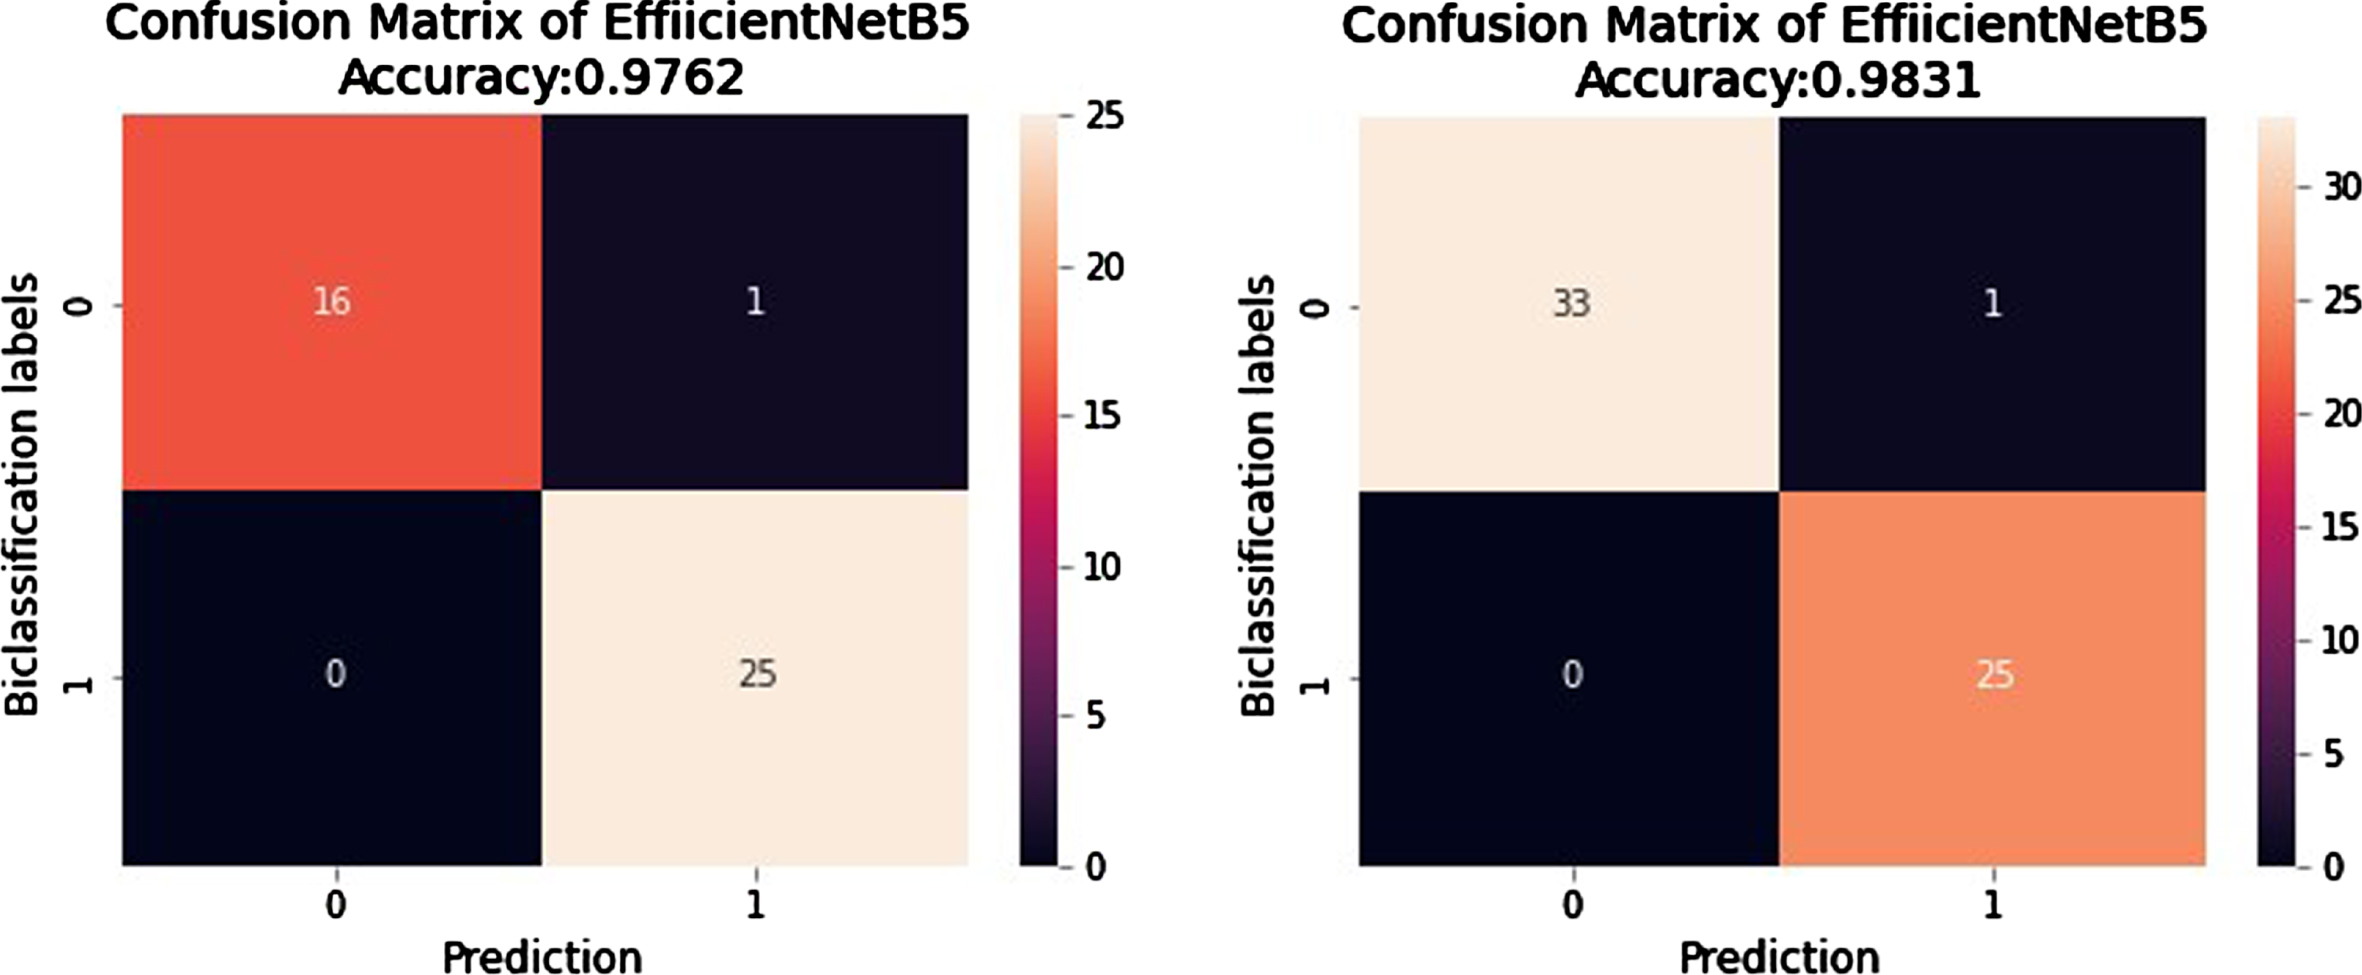 Confusion Matrix of predictions generated from EfficientNetB5 for External Validation.